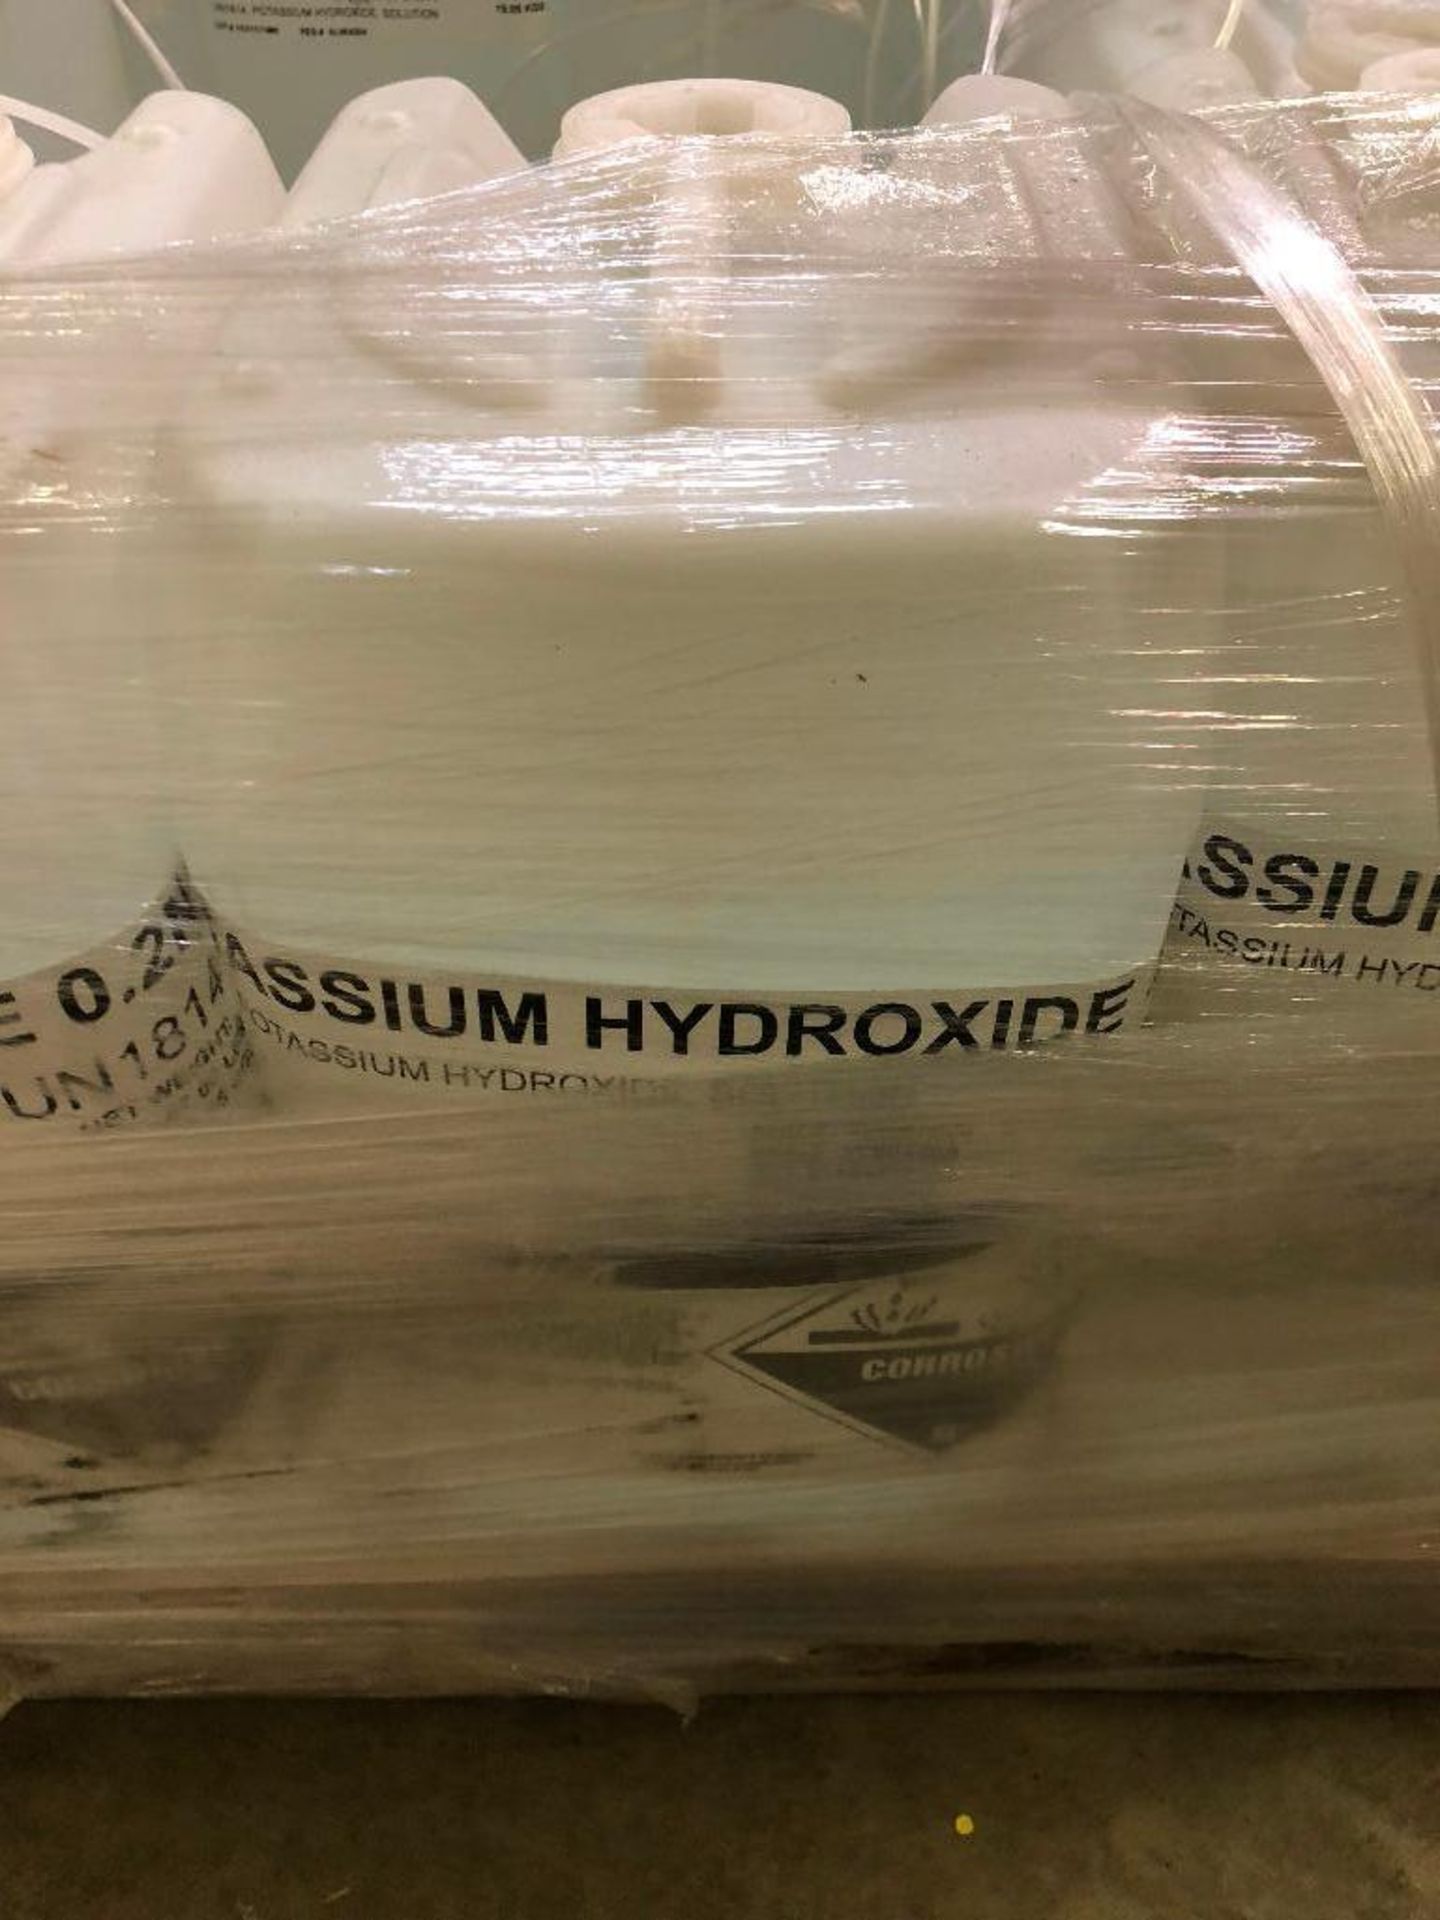 DESCRIPTION: (12) CONTAINERS OF POTASSIUM HYDROXIDE SOLUTION SIZE: 5 GALLON LOCATION: BACK BAY THIS - Image 3 of 3